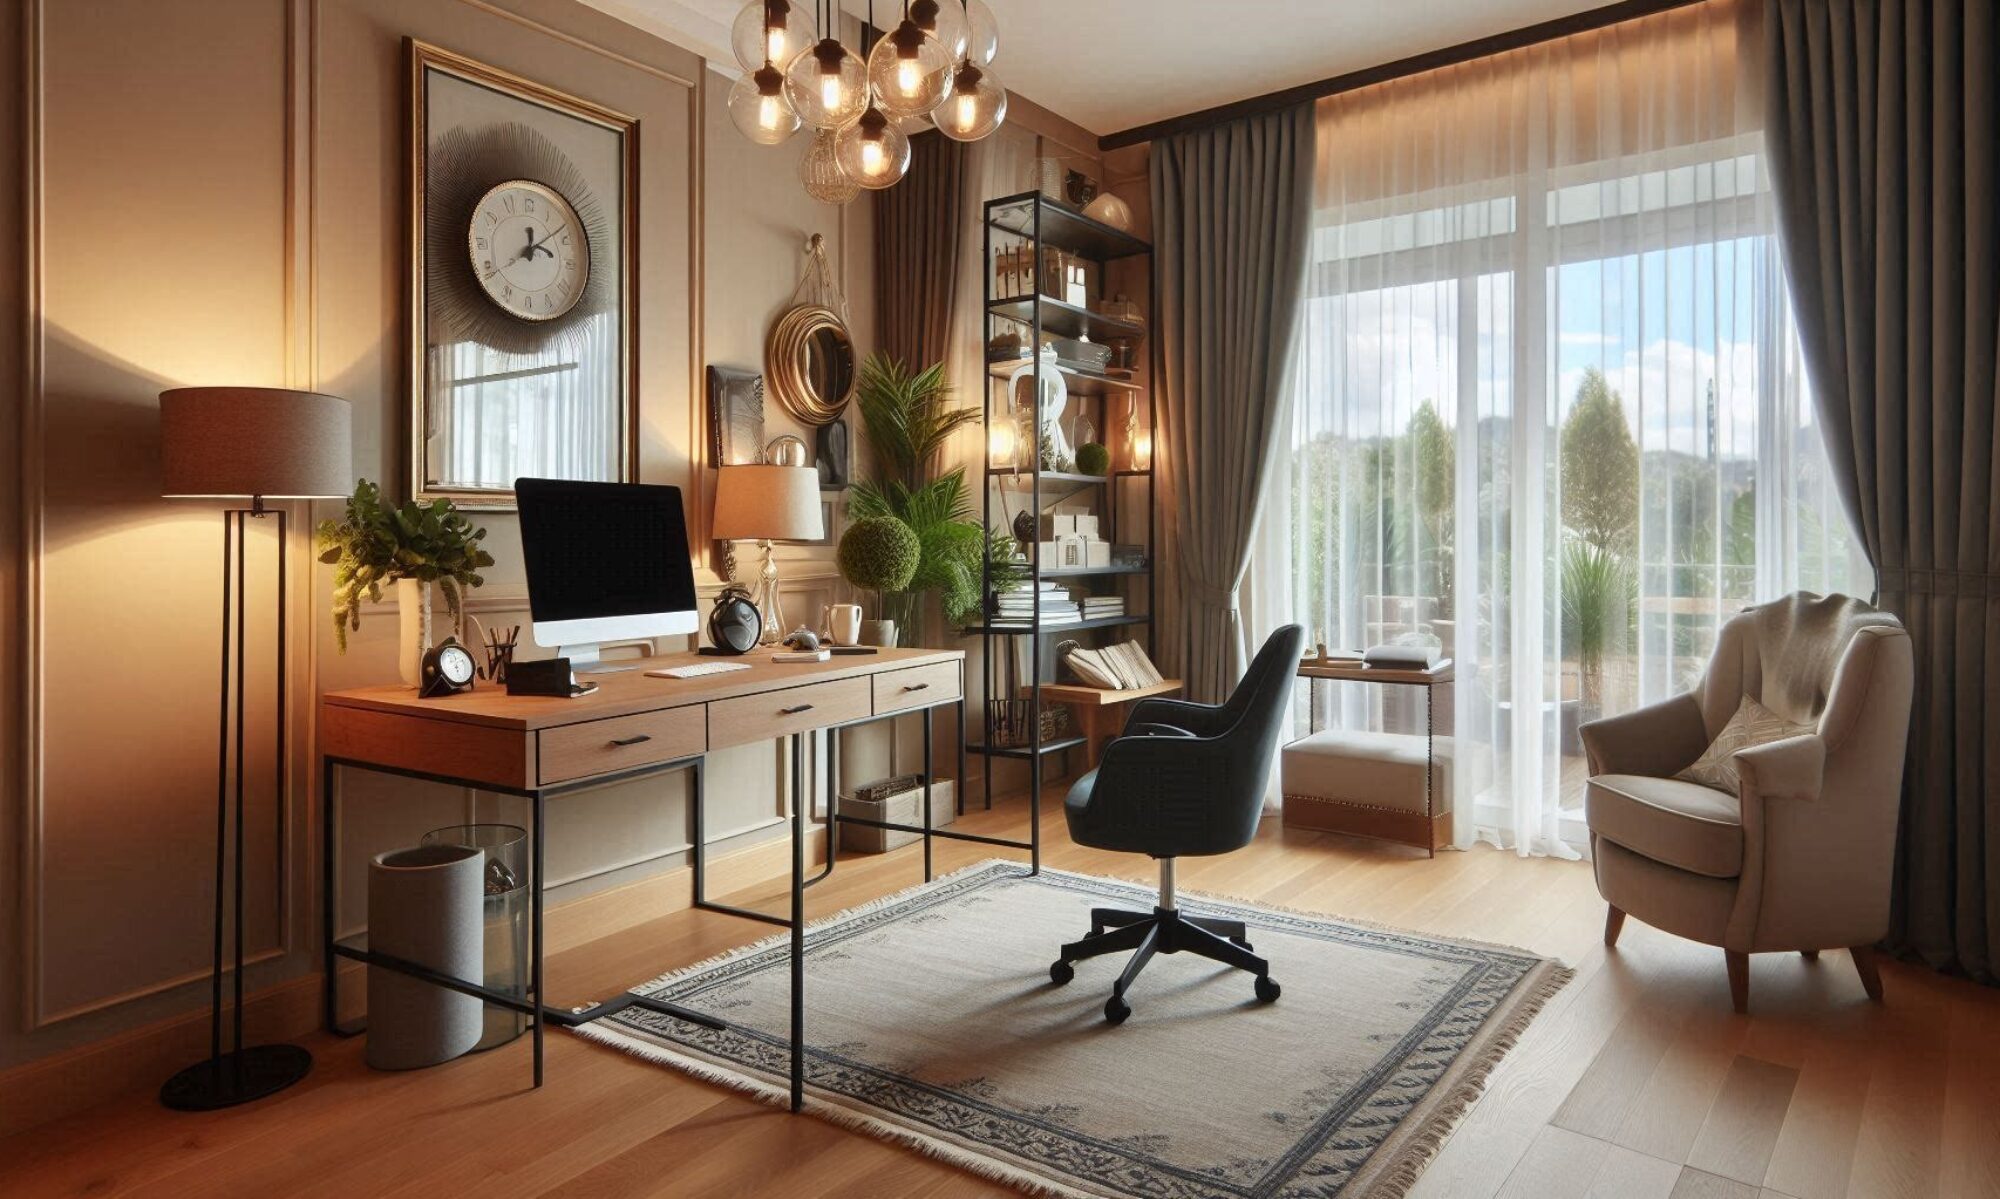 Staged home office - This image created for Scena Home Staging by AI